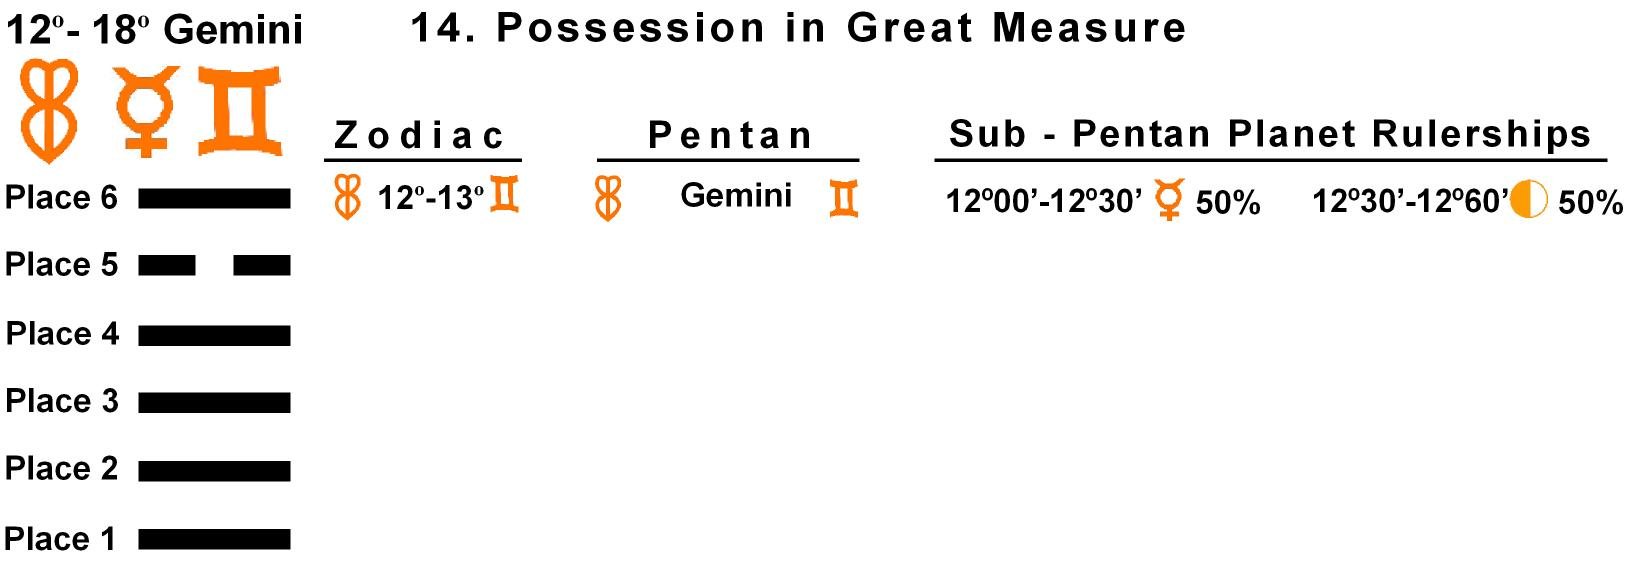 Pent-lines-03GE 12-13 Hx-14 Possession In Great Measure